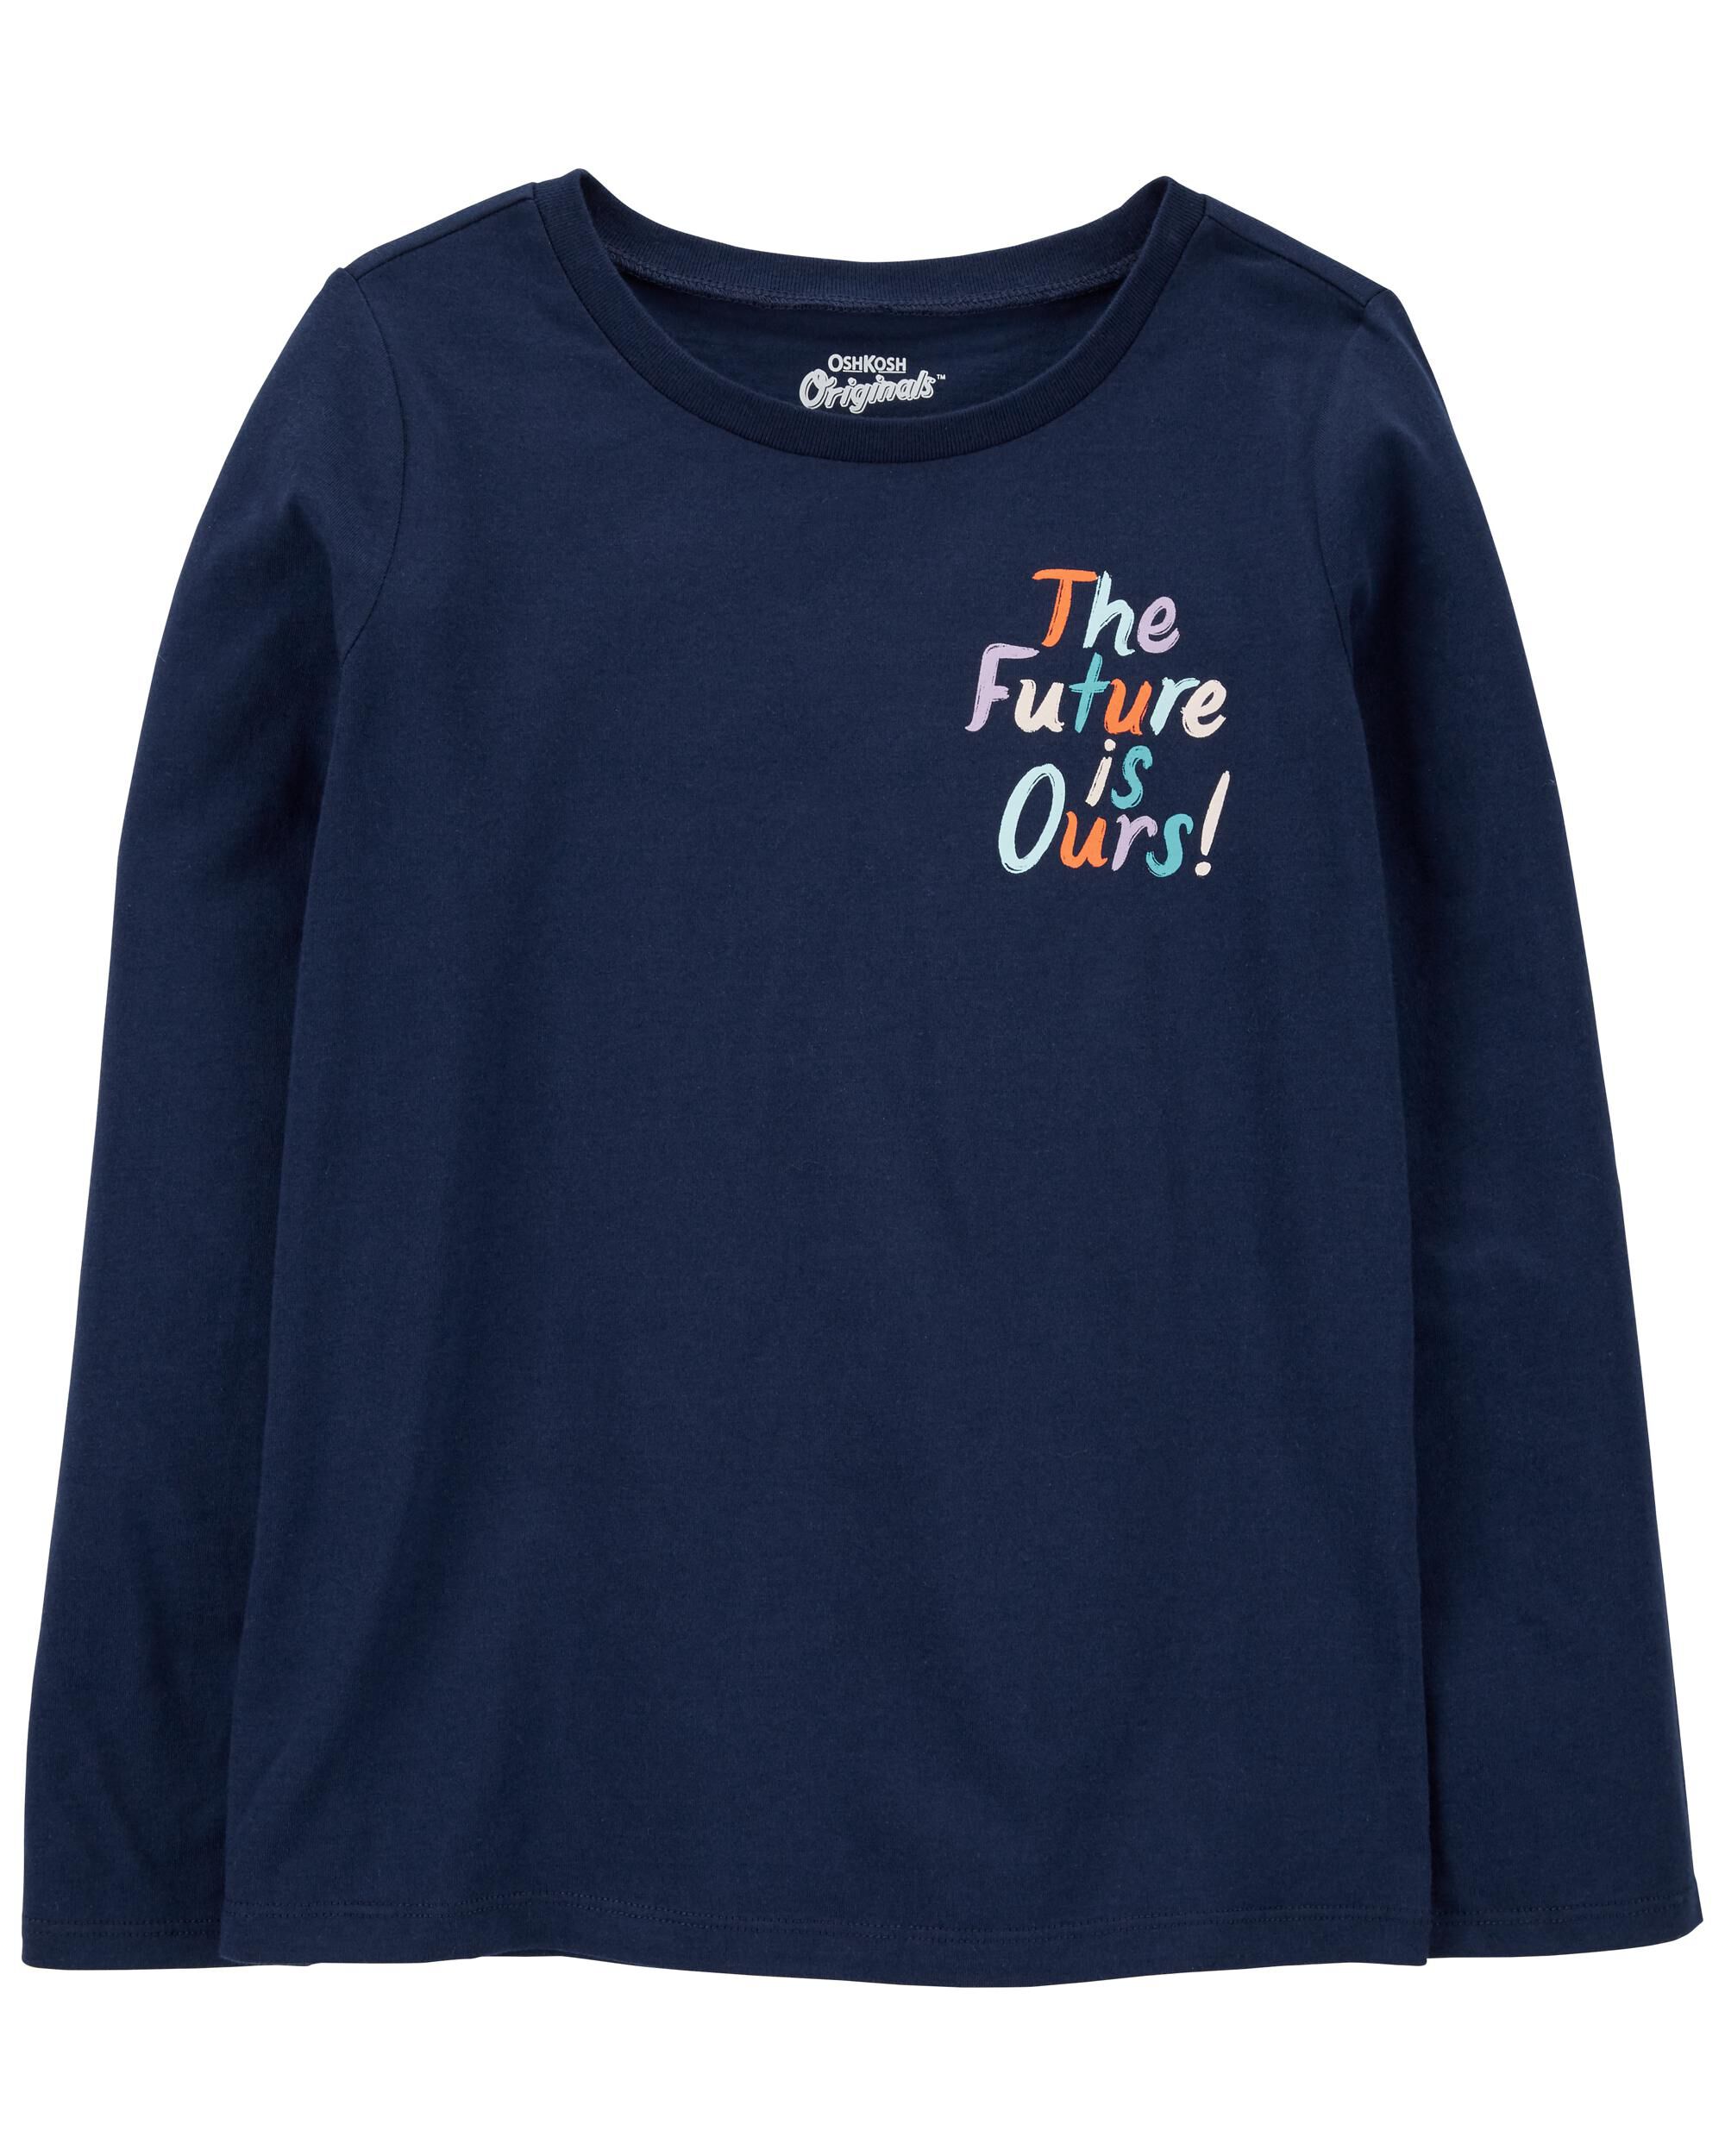 Carters The Future Is Ours Jersey Tee